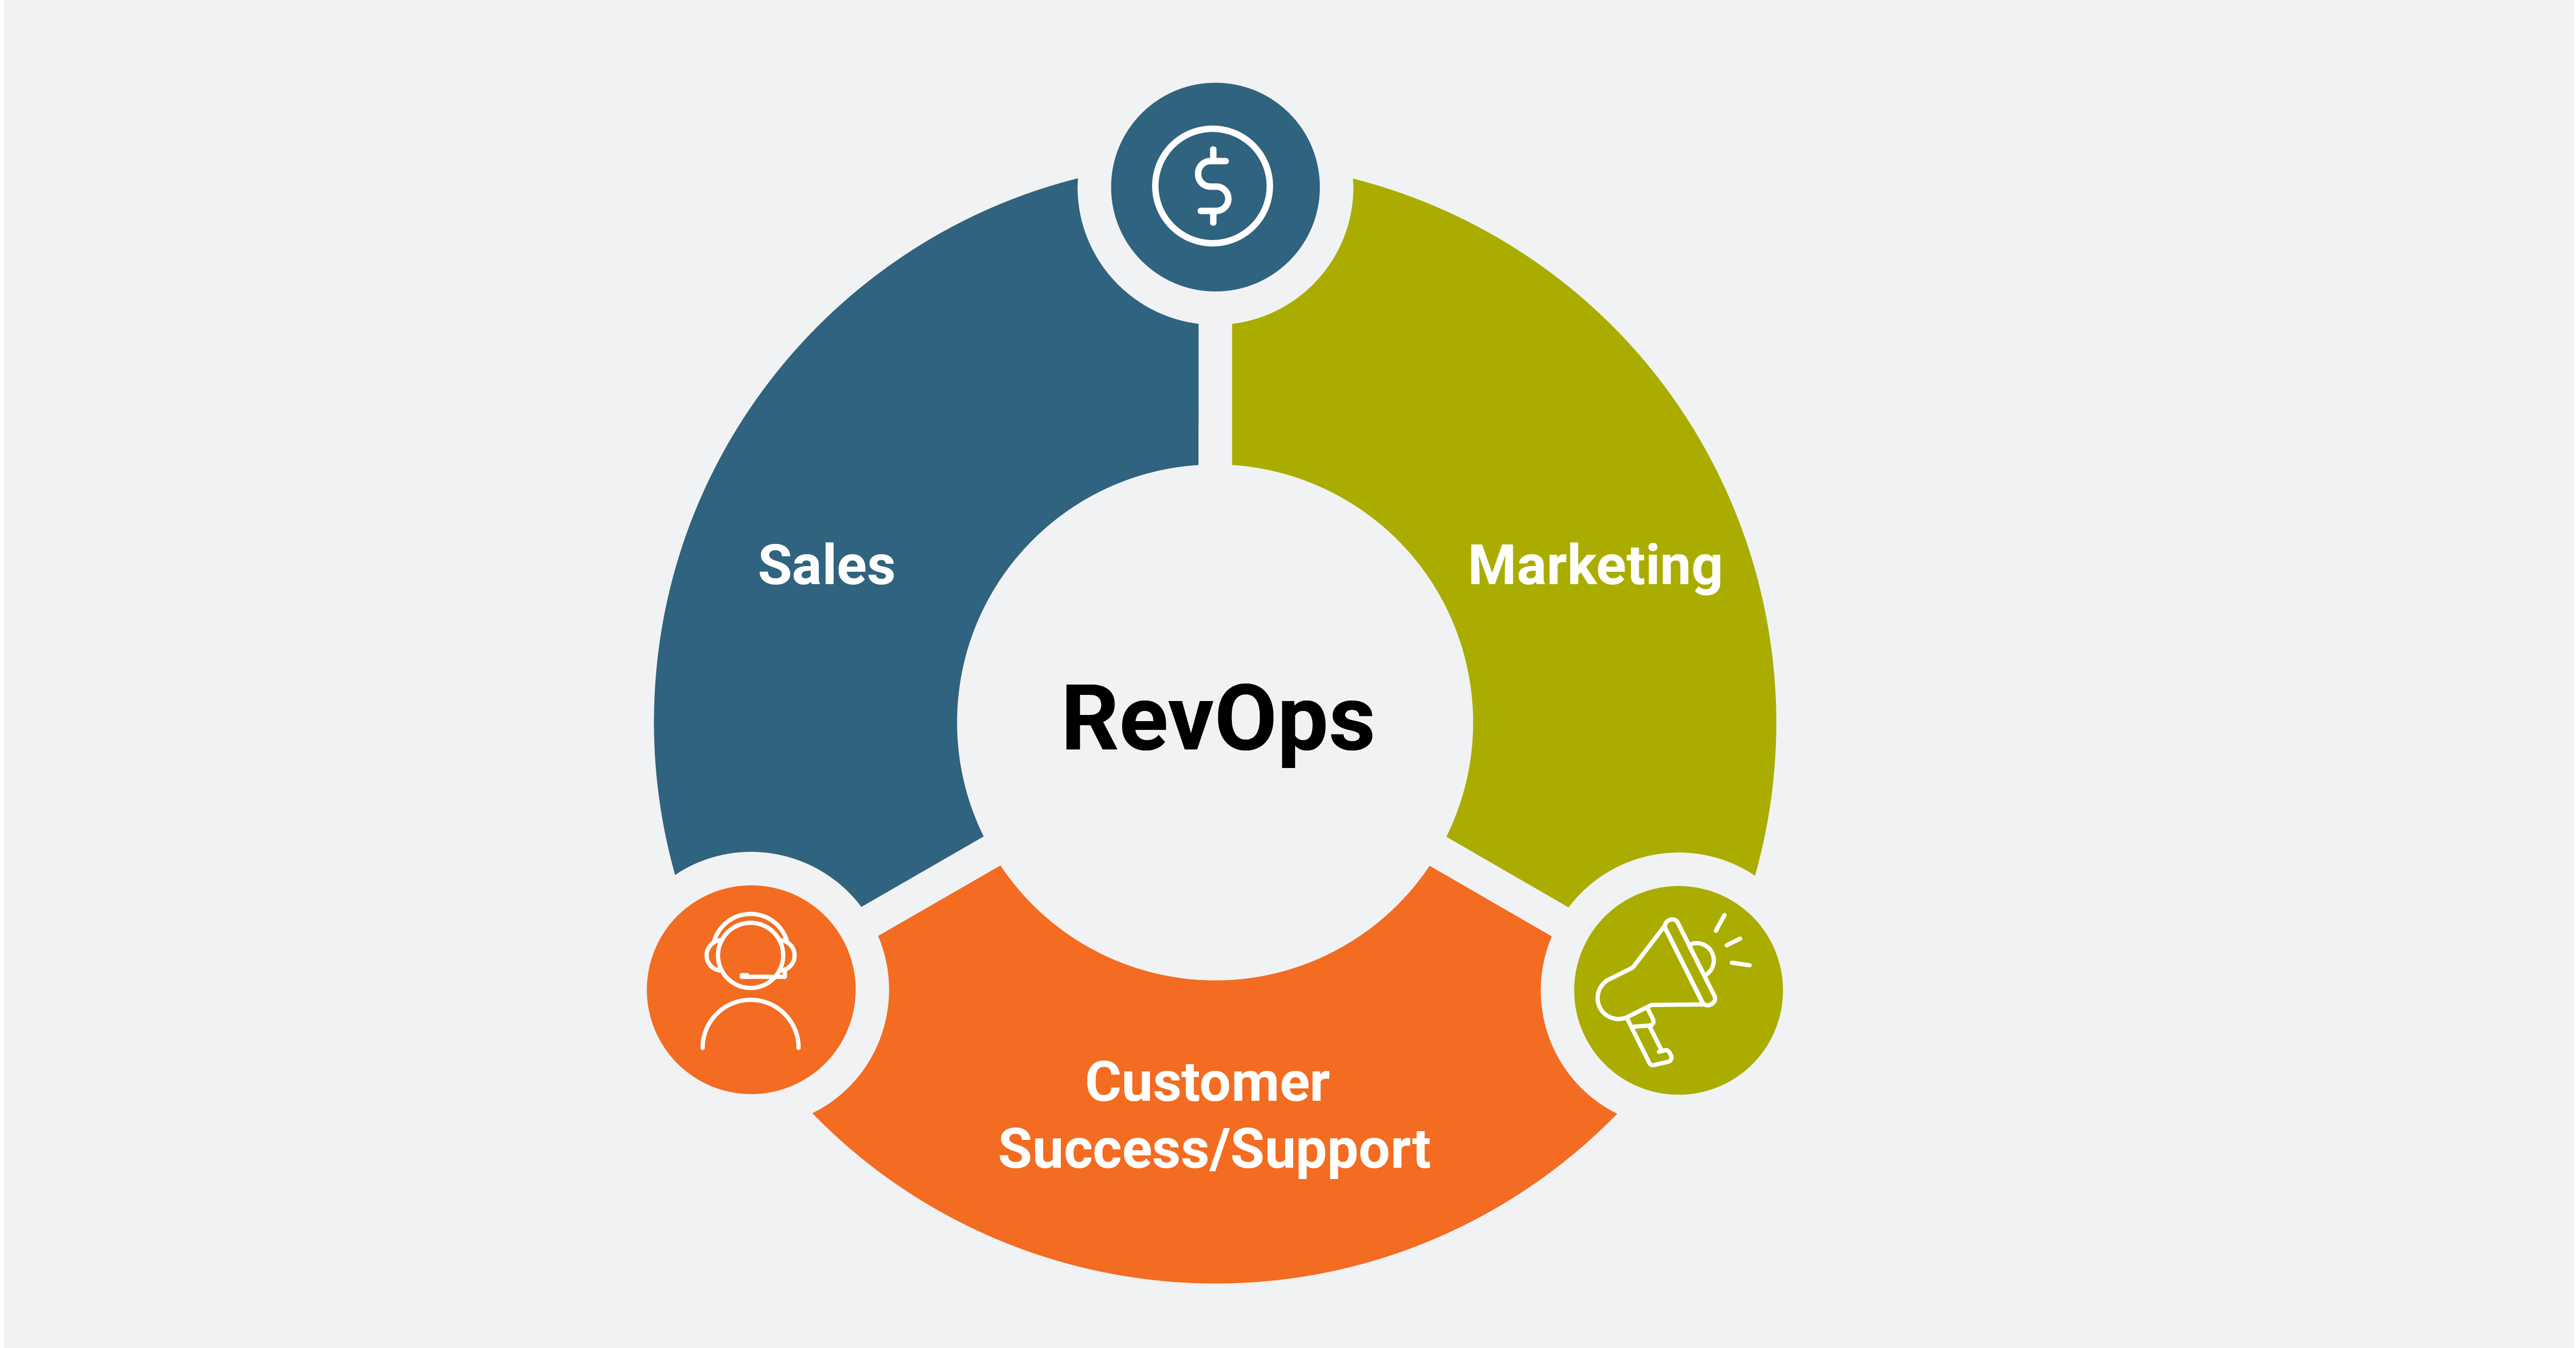 RevOps aligns sales, marketing, and customer success/support.